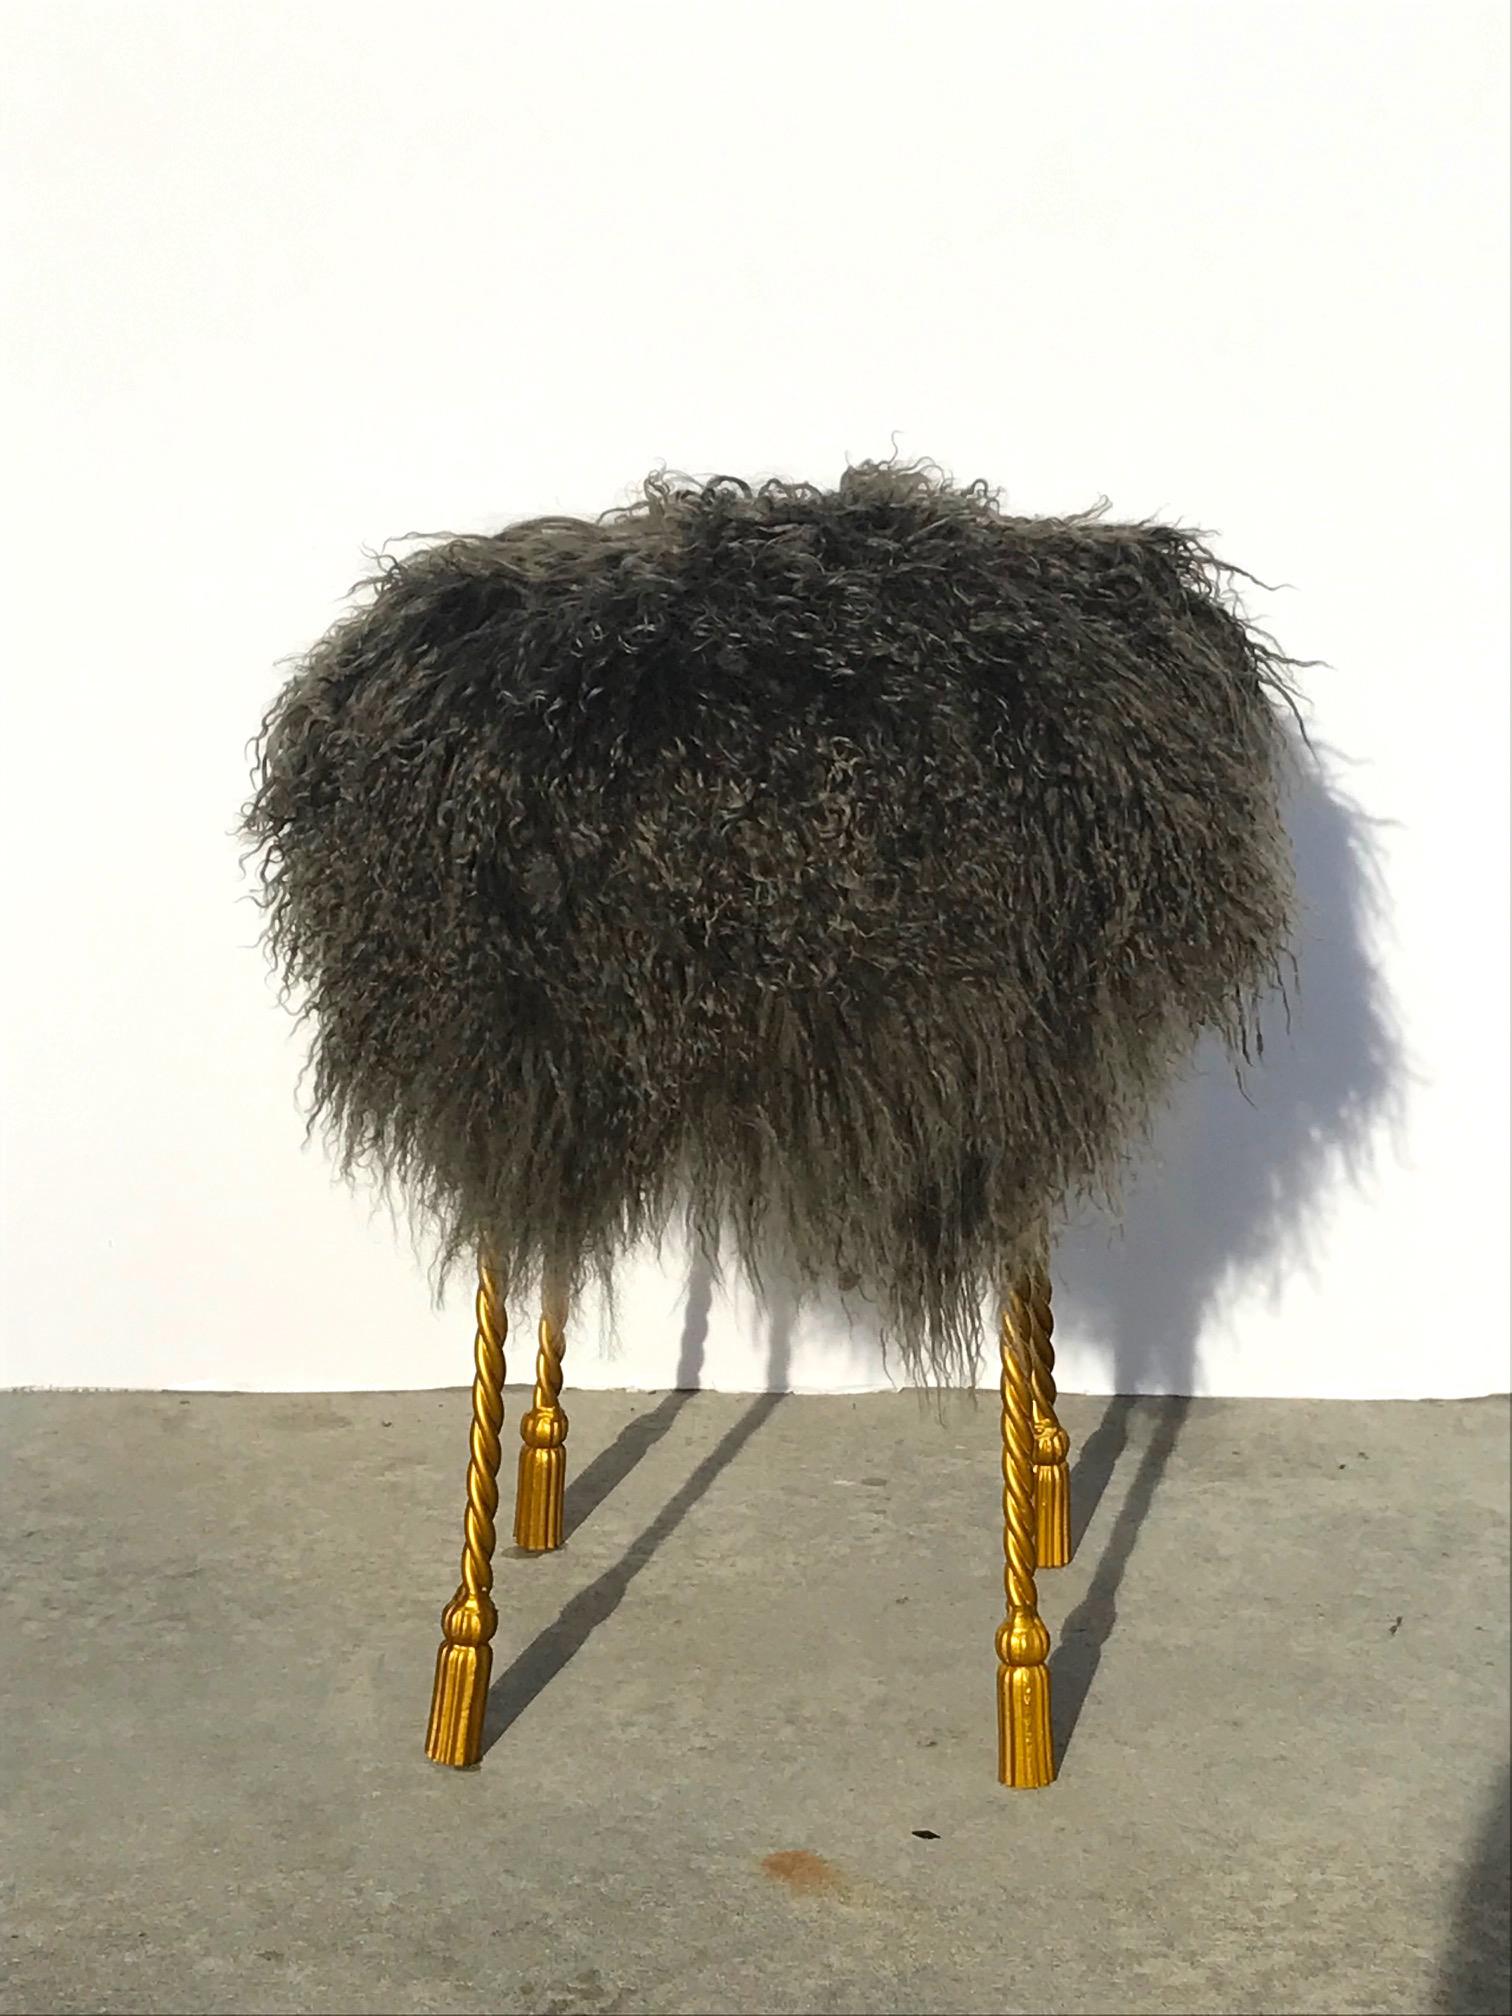 Glamorous Hollywood Regency accent stool or vanity stool. Features wrought iron base with rope design and tassel feet. Hand painted in gold leaf and upholstered in chic Mongolian lamb wool in variant hues somewhere between mushroom and green moss.